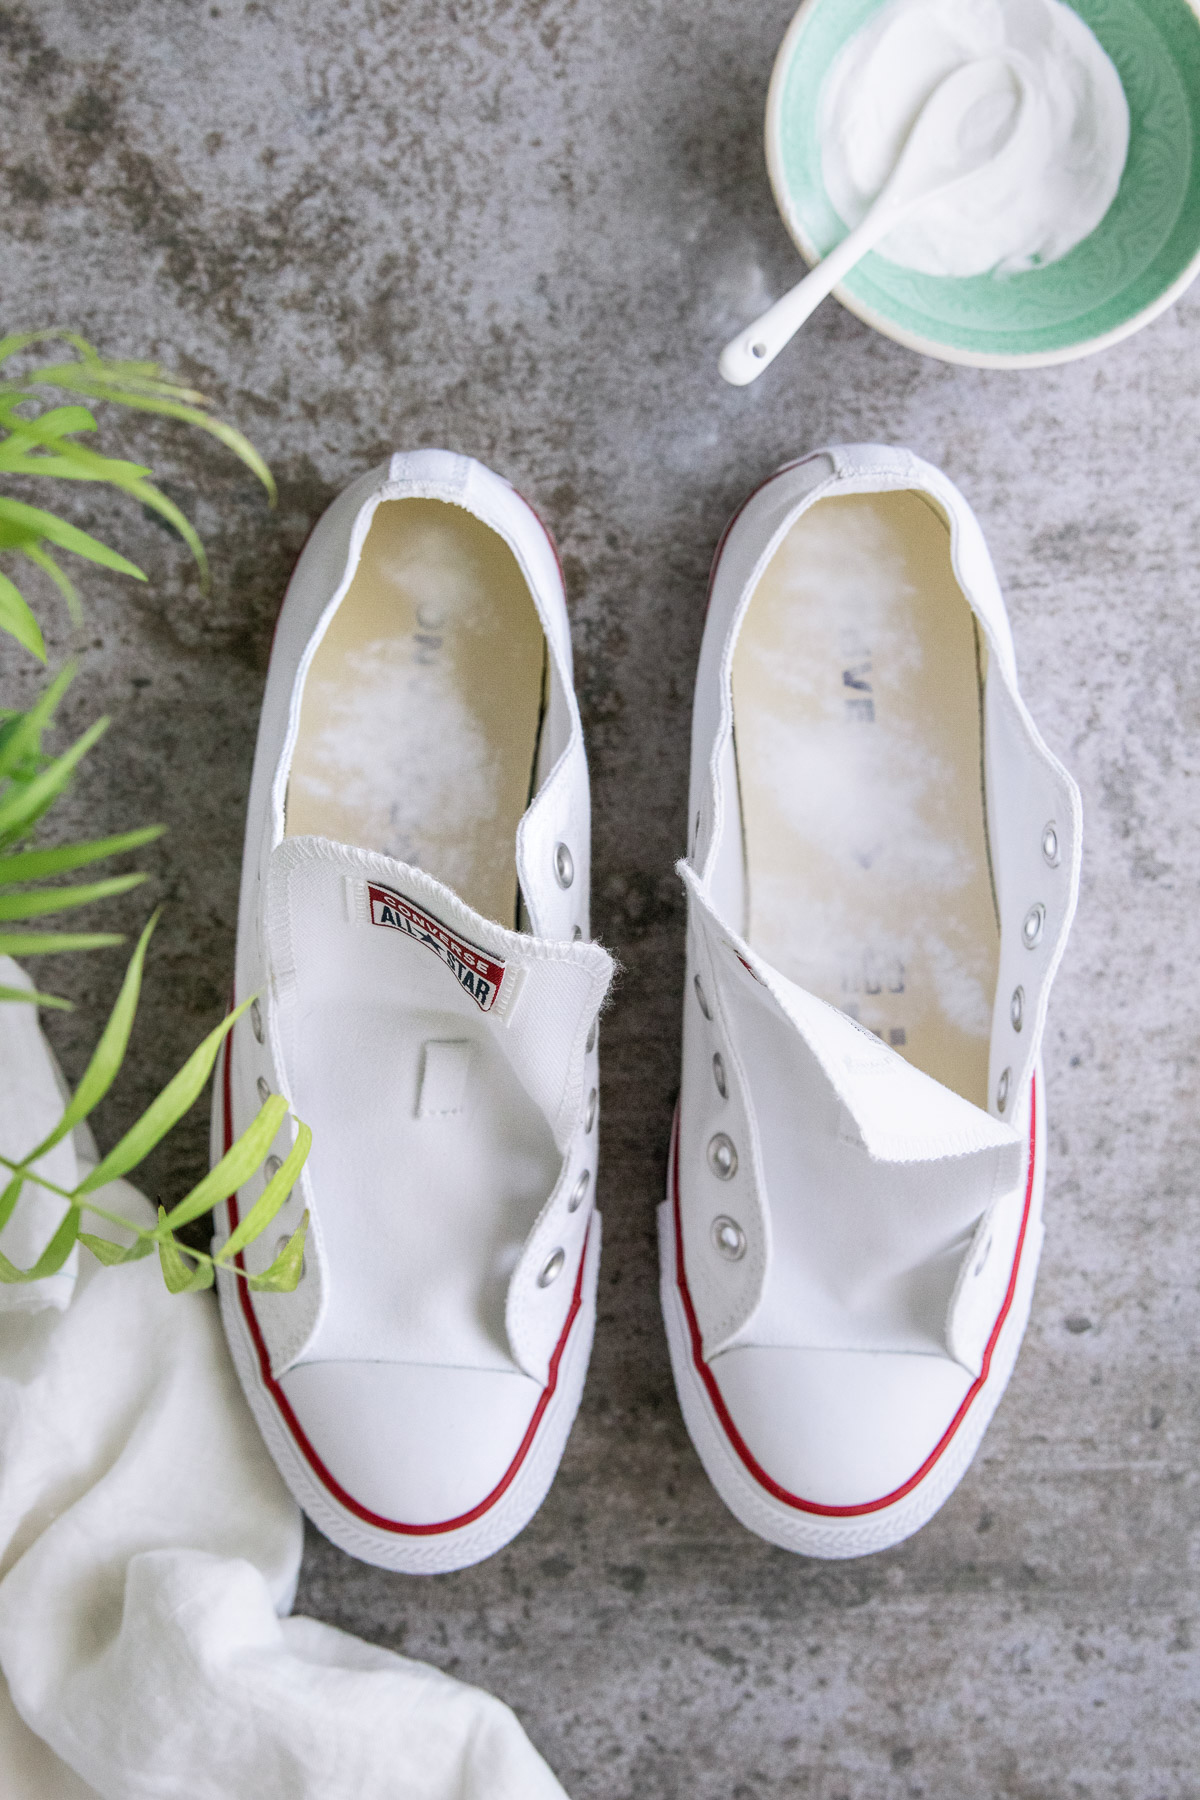 How to clean the insoles of converse shoes